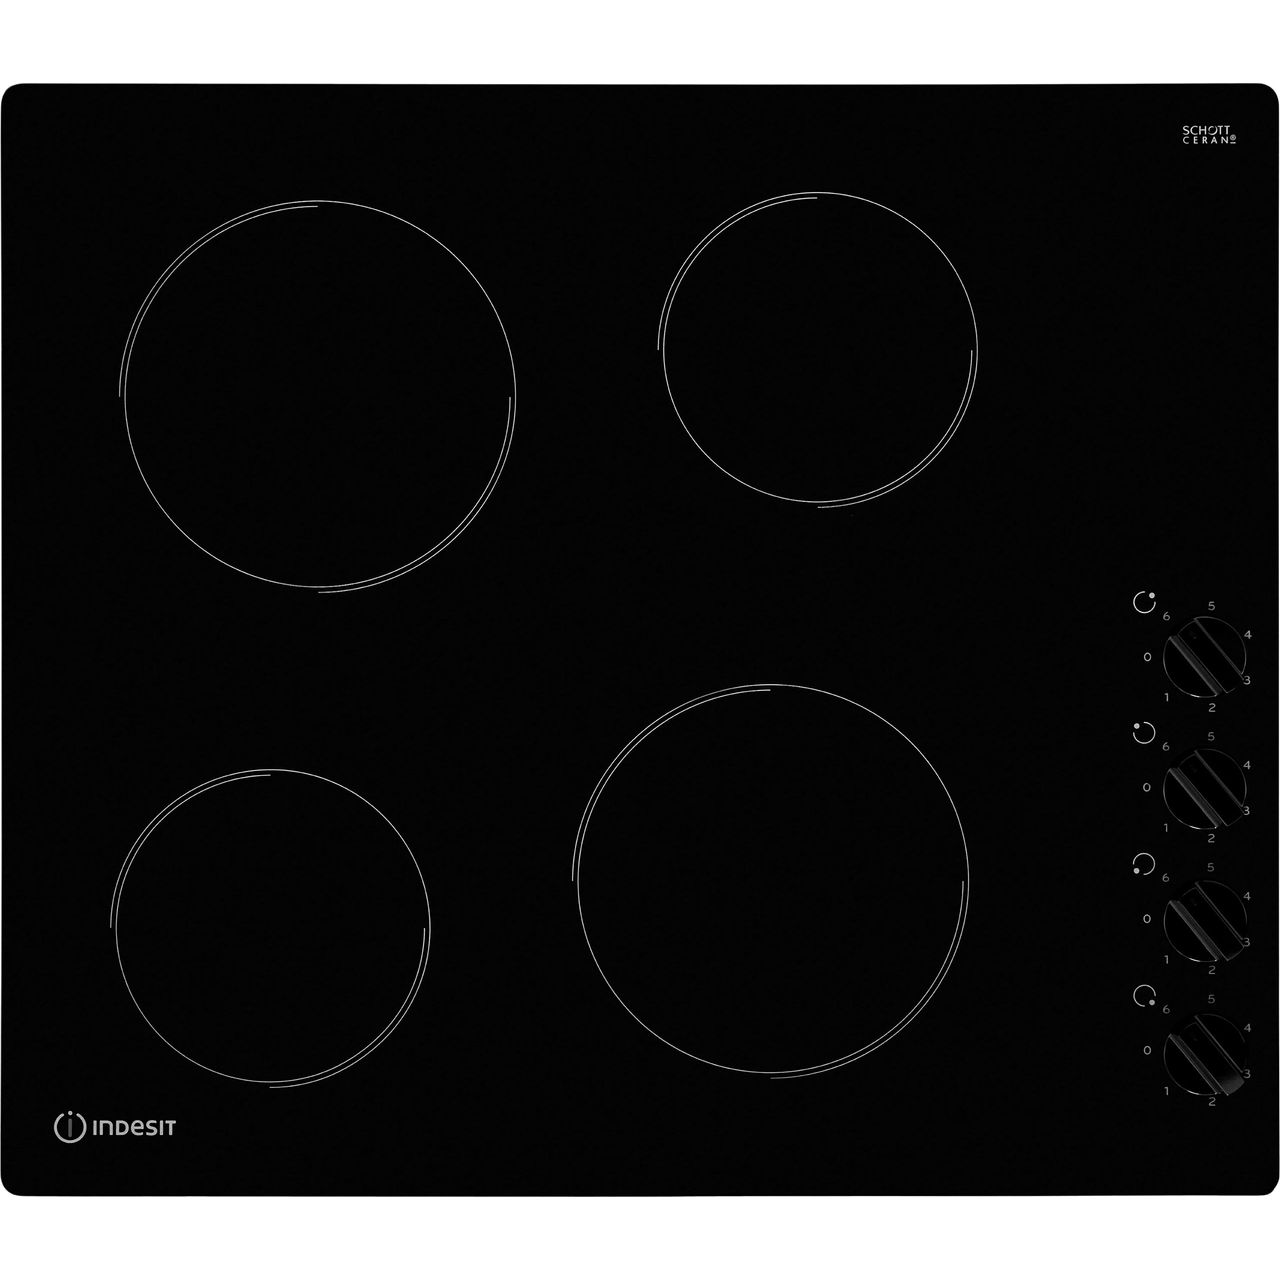 Indesit Aria K002979 Built In Electric Single Oven and Ceramic Hob Pack Review